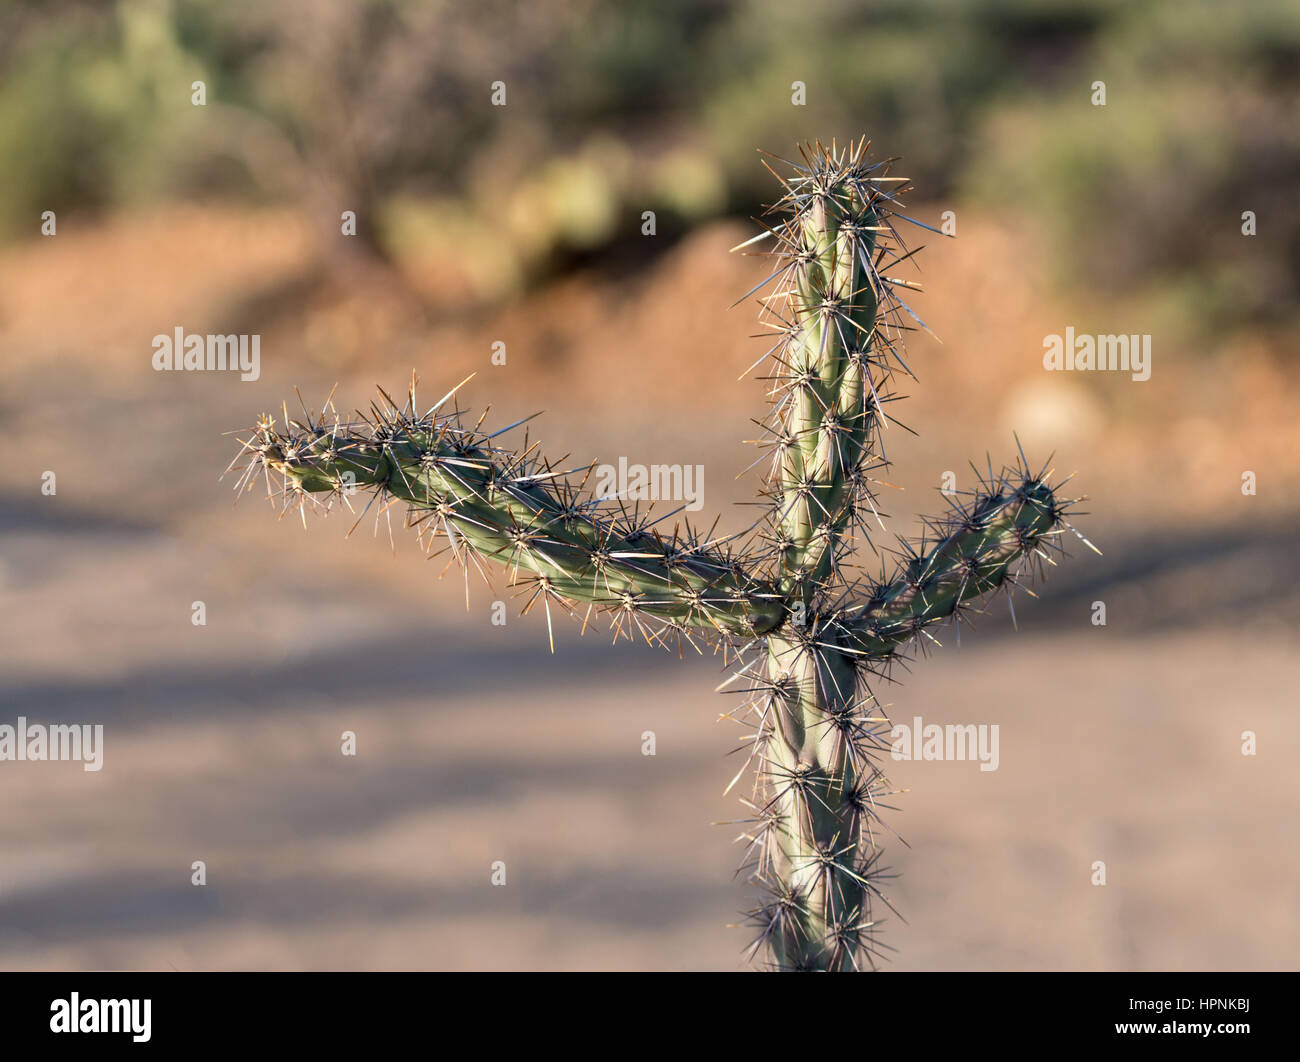 Macro image of the three arms of a cholla cactus isolated in desert showing sharp spiky branches Stock Photo